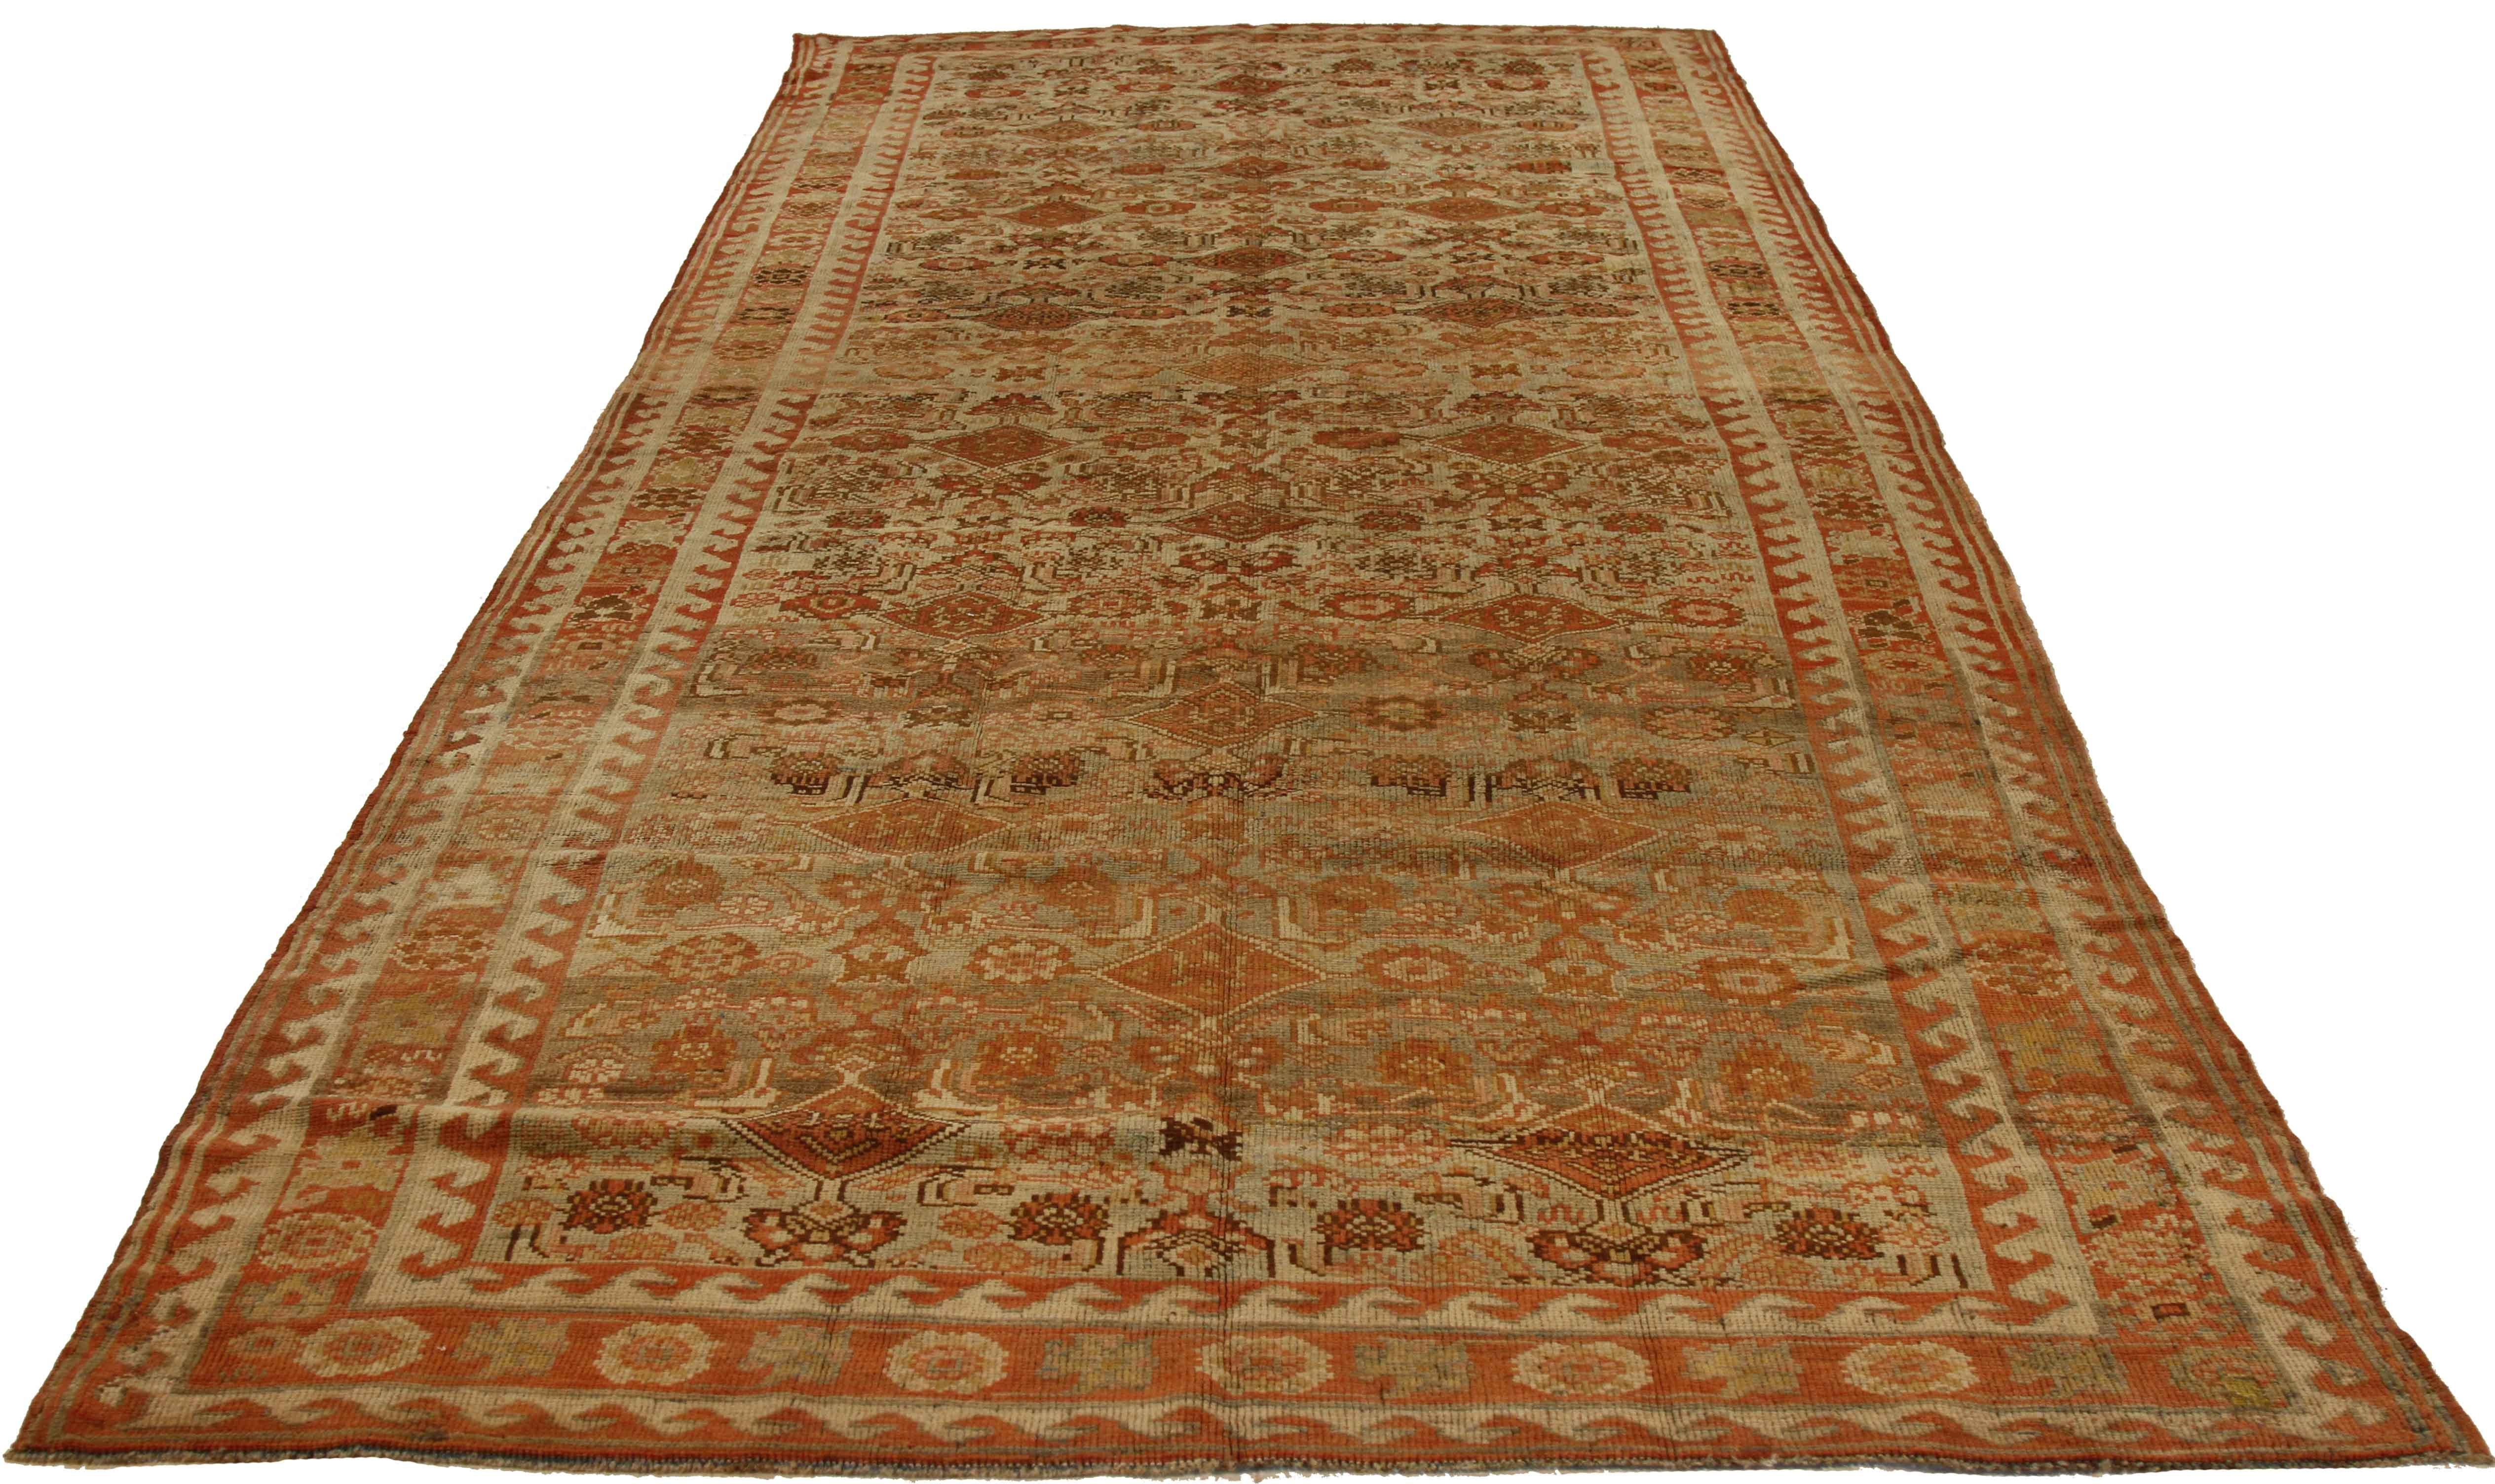 Made from the finest handspun wool and organic plant-based dyes, this antique Persian rug was created in the 1930s using weaving details commonly associated with Bijar weavers. The motif is traditionally centered on nature and animal symbols which